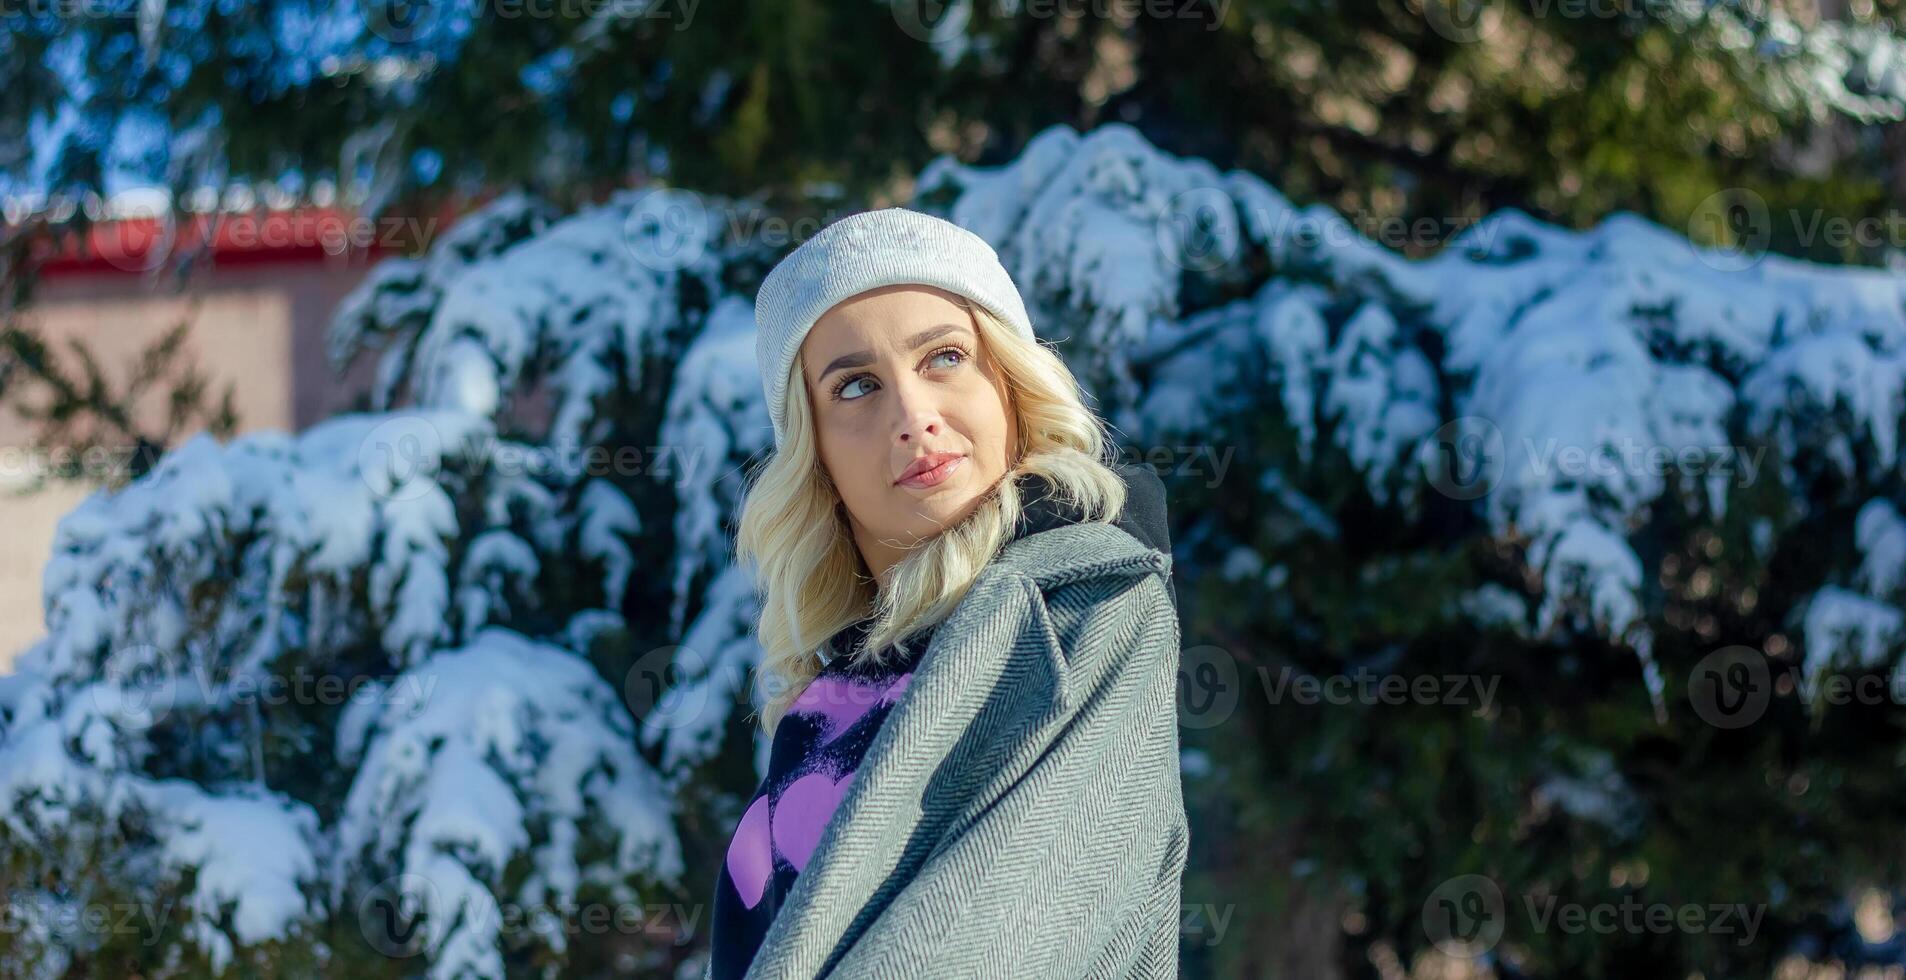 portrait of a woman in a park, portrait of a woman in winter park, portrait of a blonde woman, woman in hat photo